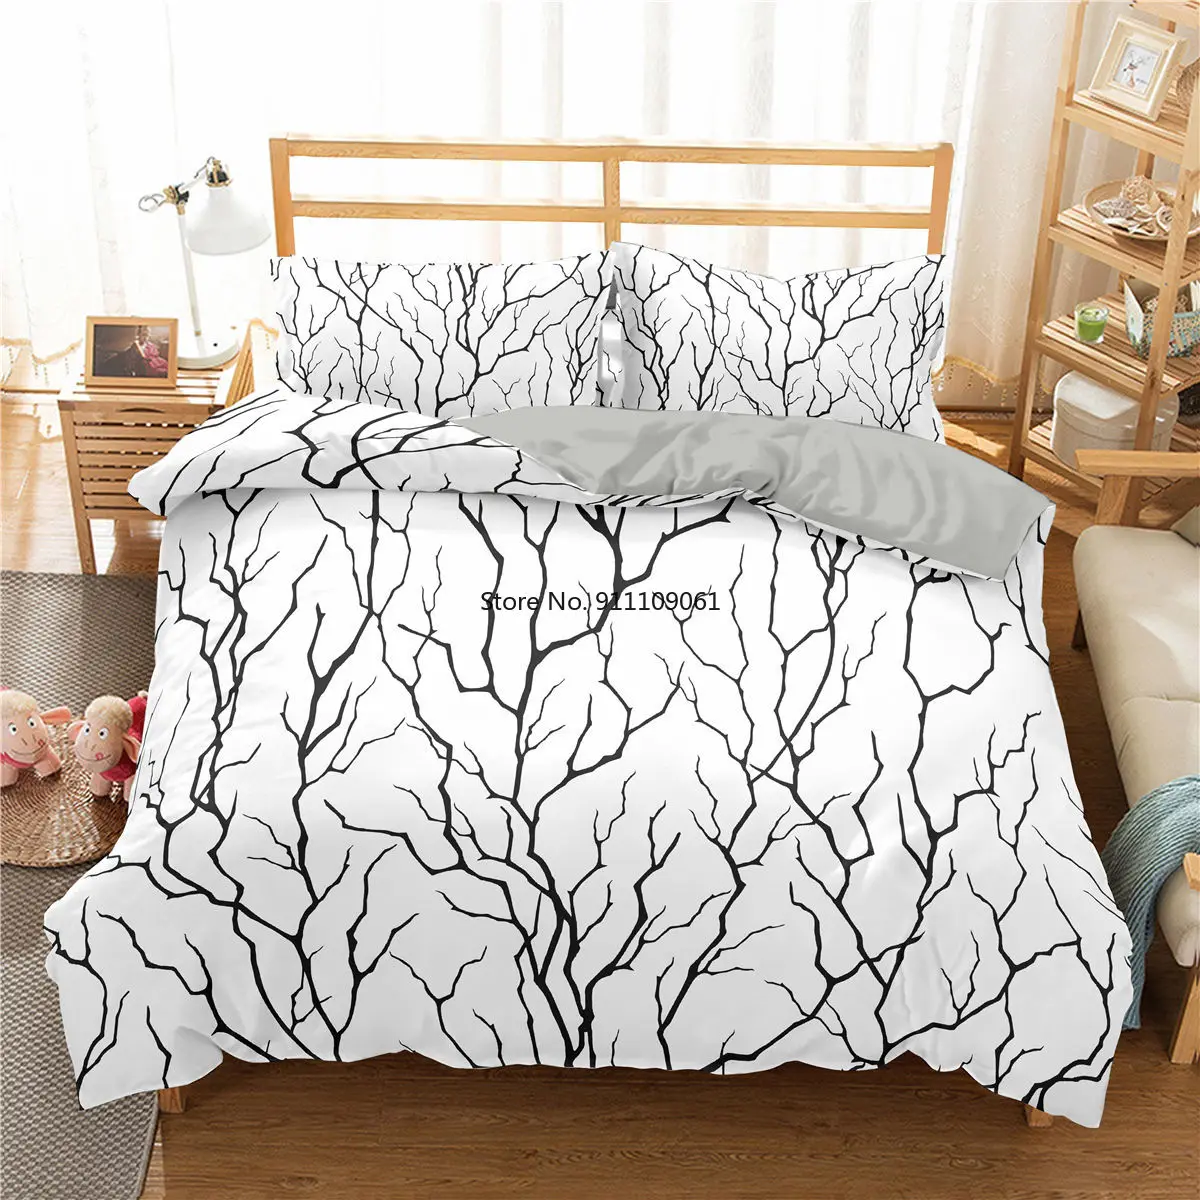 

Plant Bedding Set 3D Tree Branch Printed Duvet Cover with Pillowcase Black White Quilt Cover Single Twin Queen King Full Size